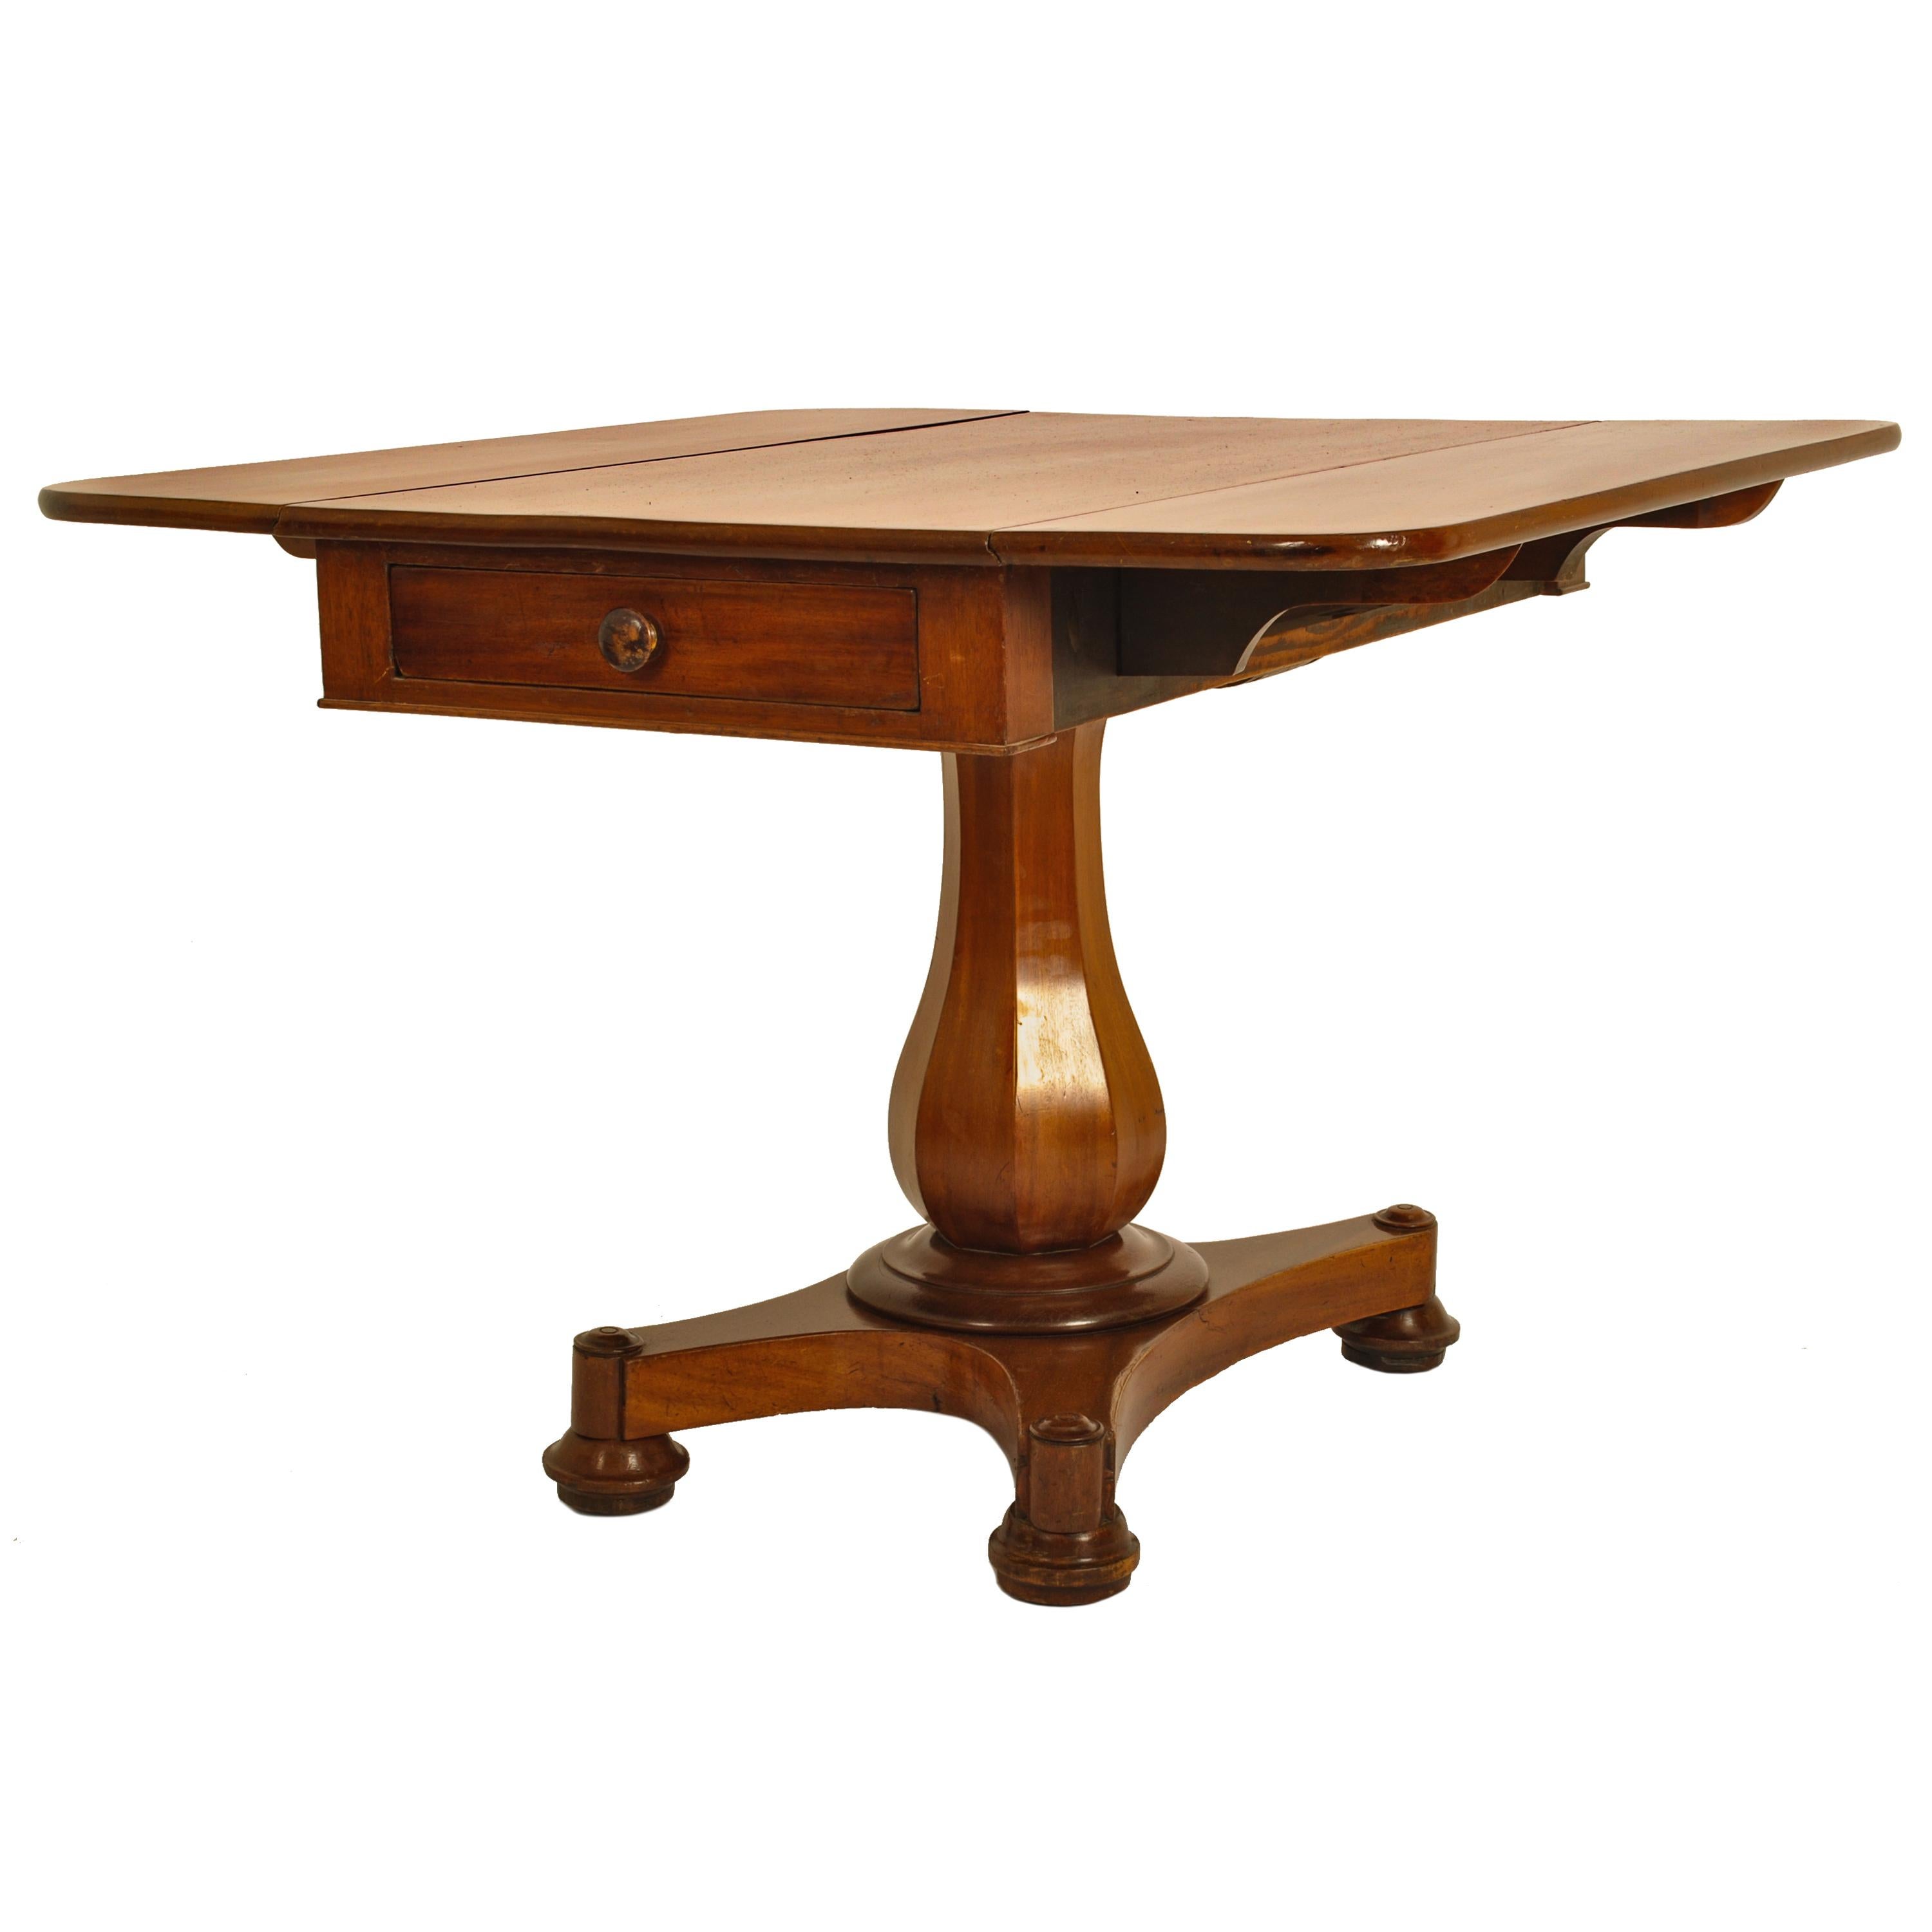 Antique American Empire Mahogany Drop Leaf Pedestal Pembroke Table Maryland 1840 In Good Condition For Sale In Portland, OR